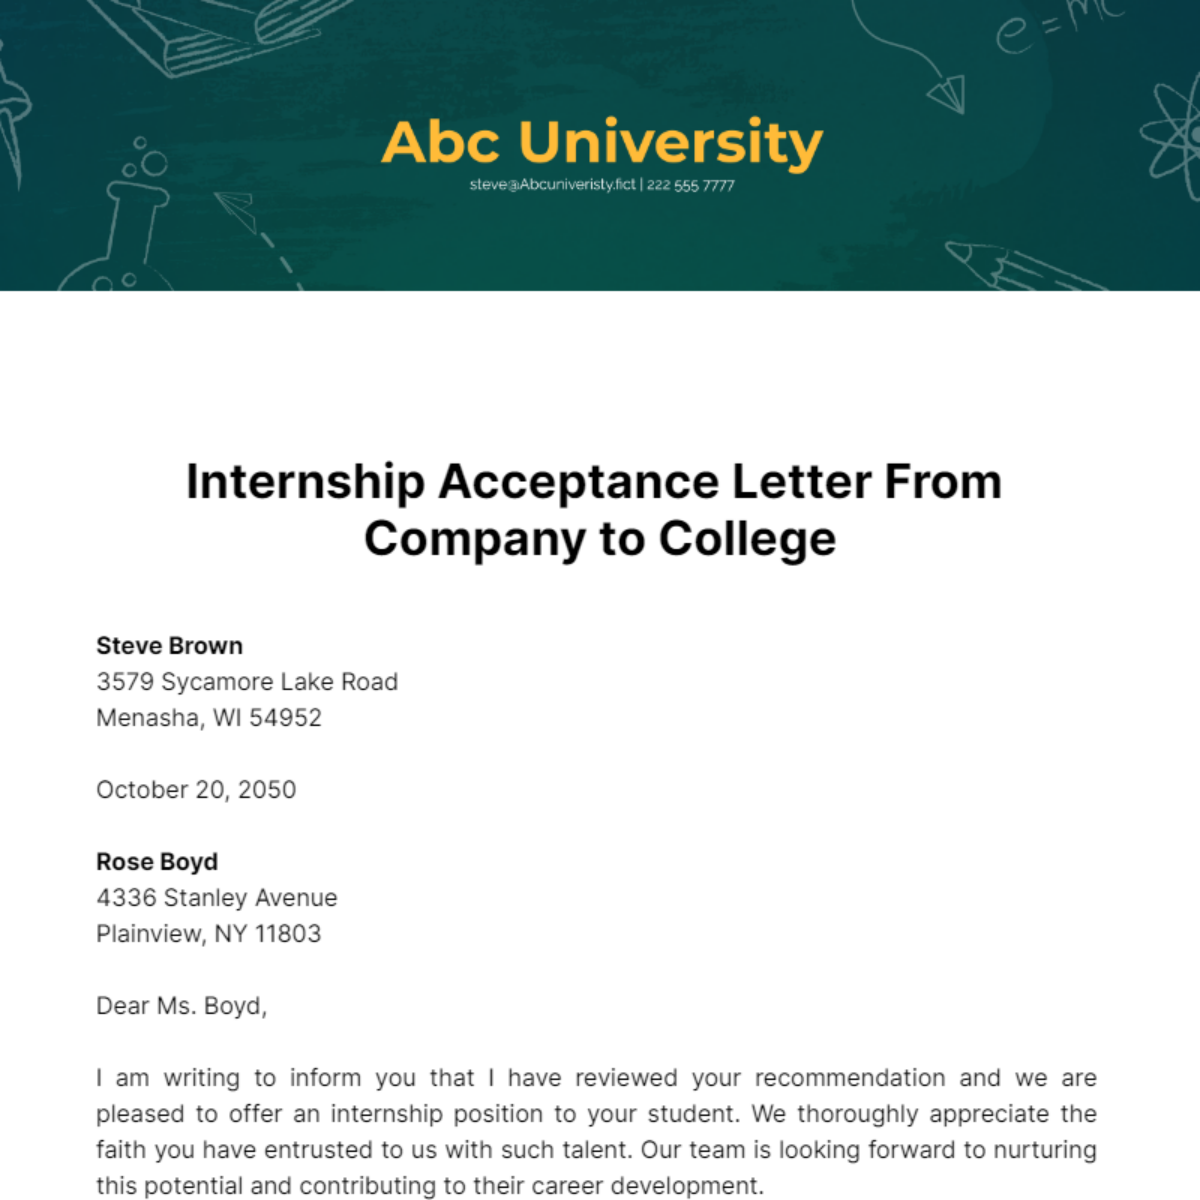 Internship Acceptance Letter from Company to College Template